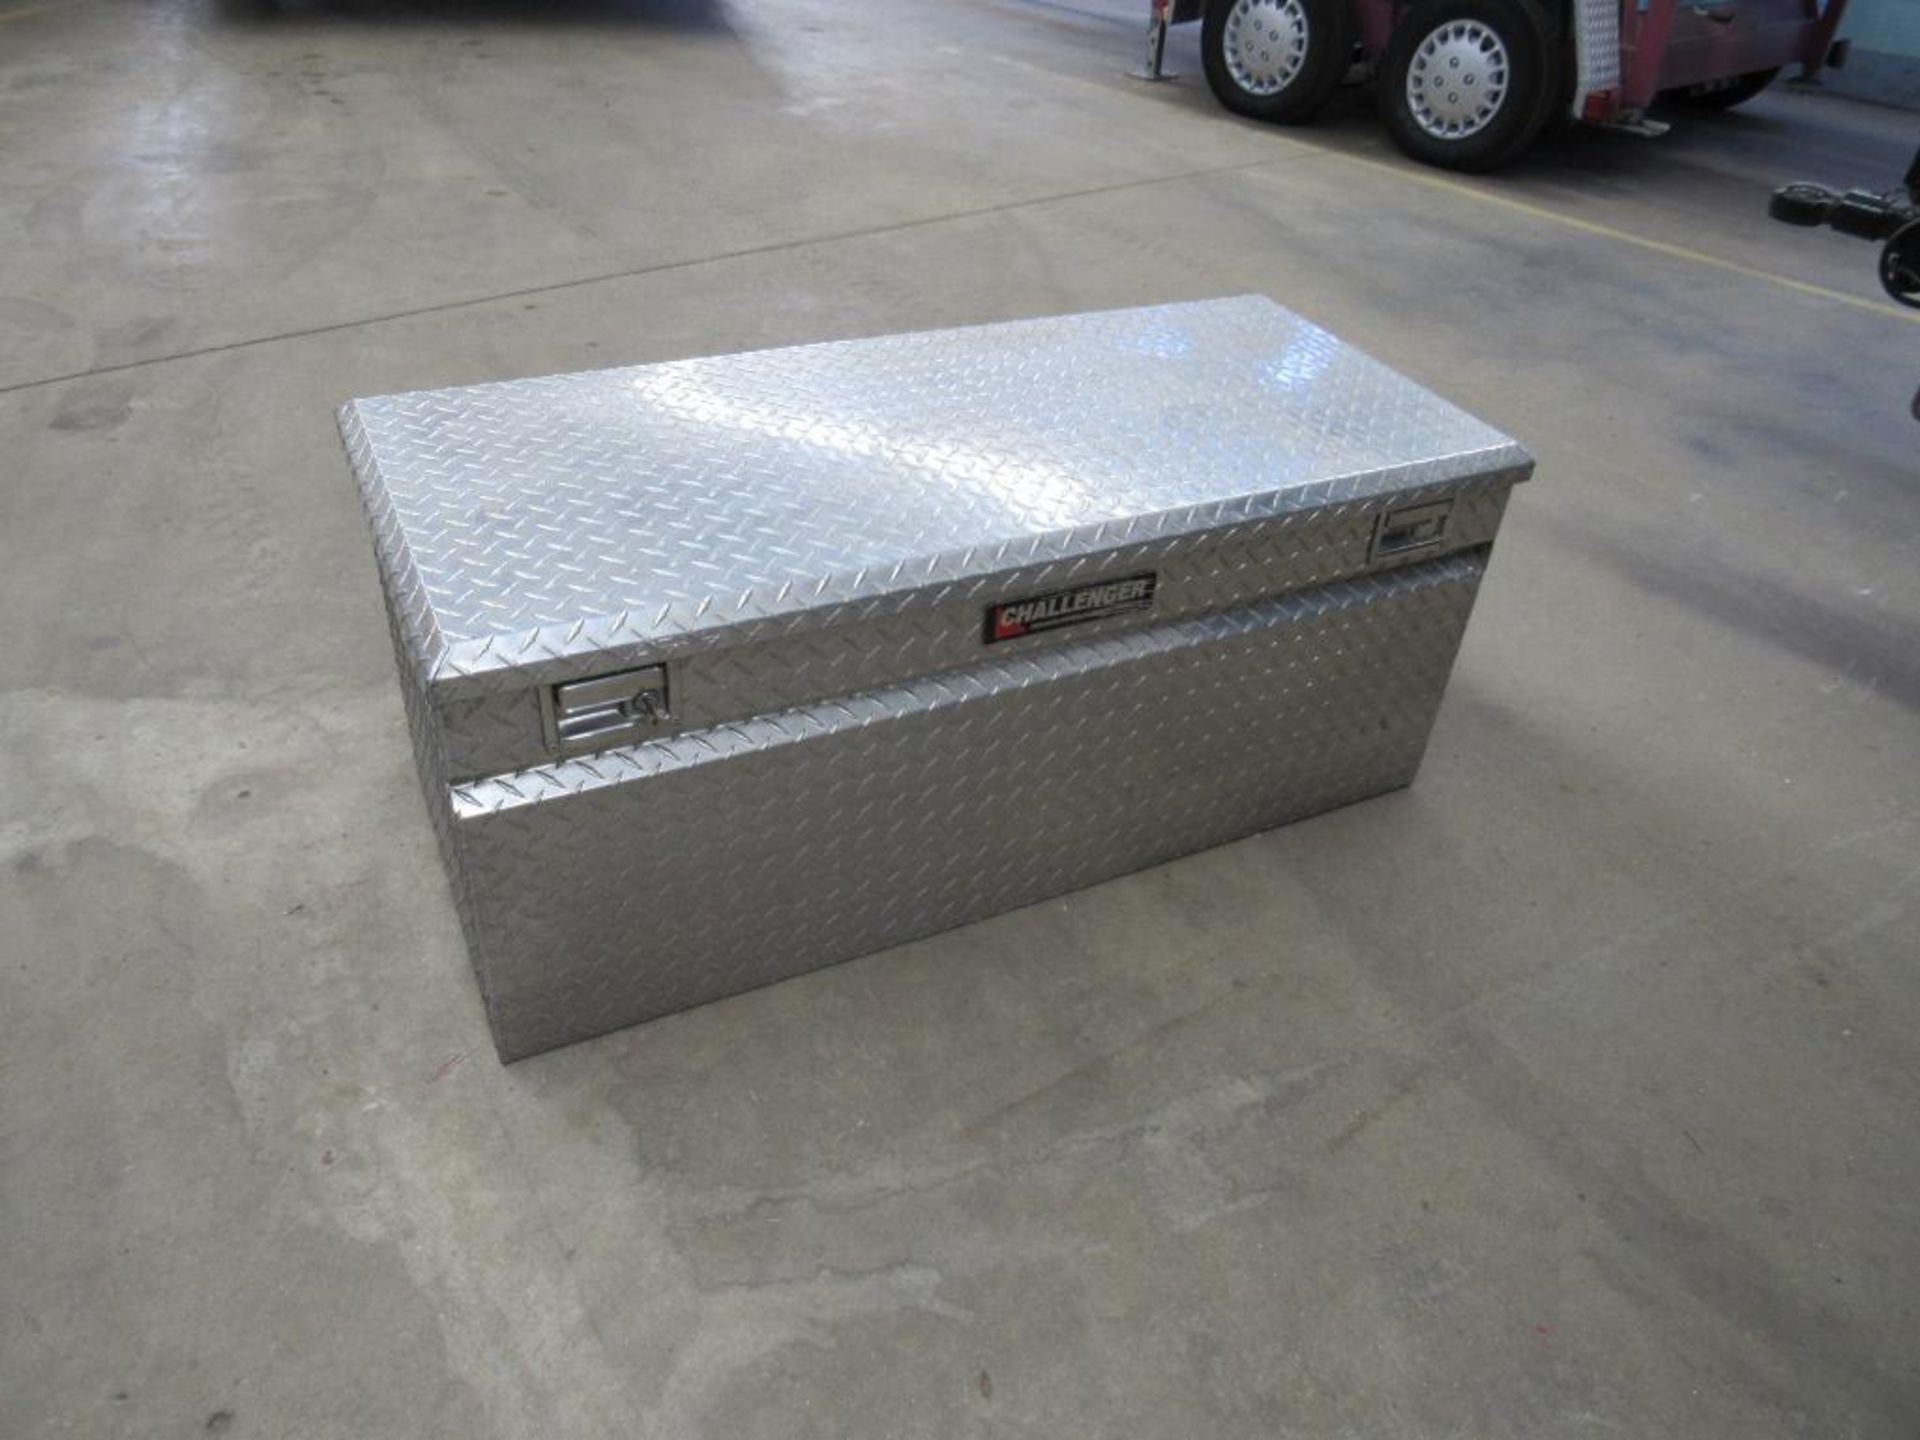 CHALLENGE Aluminum Truck Bed Tool Box 4 ft. x 20 in. x 20 in. - Image 3 of 4